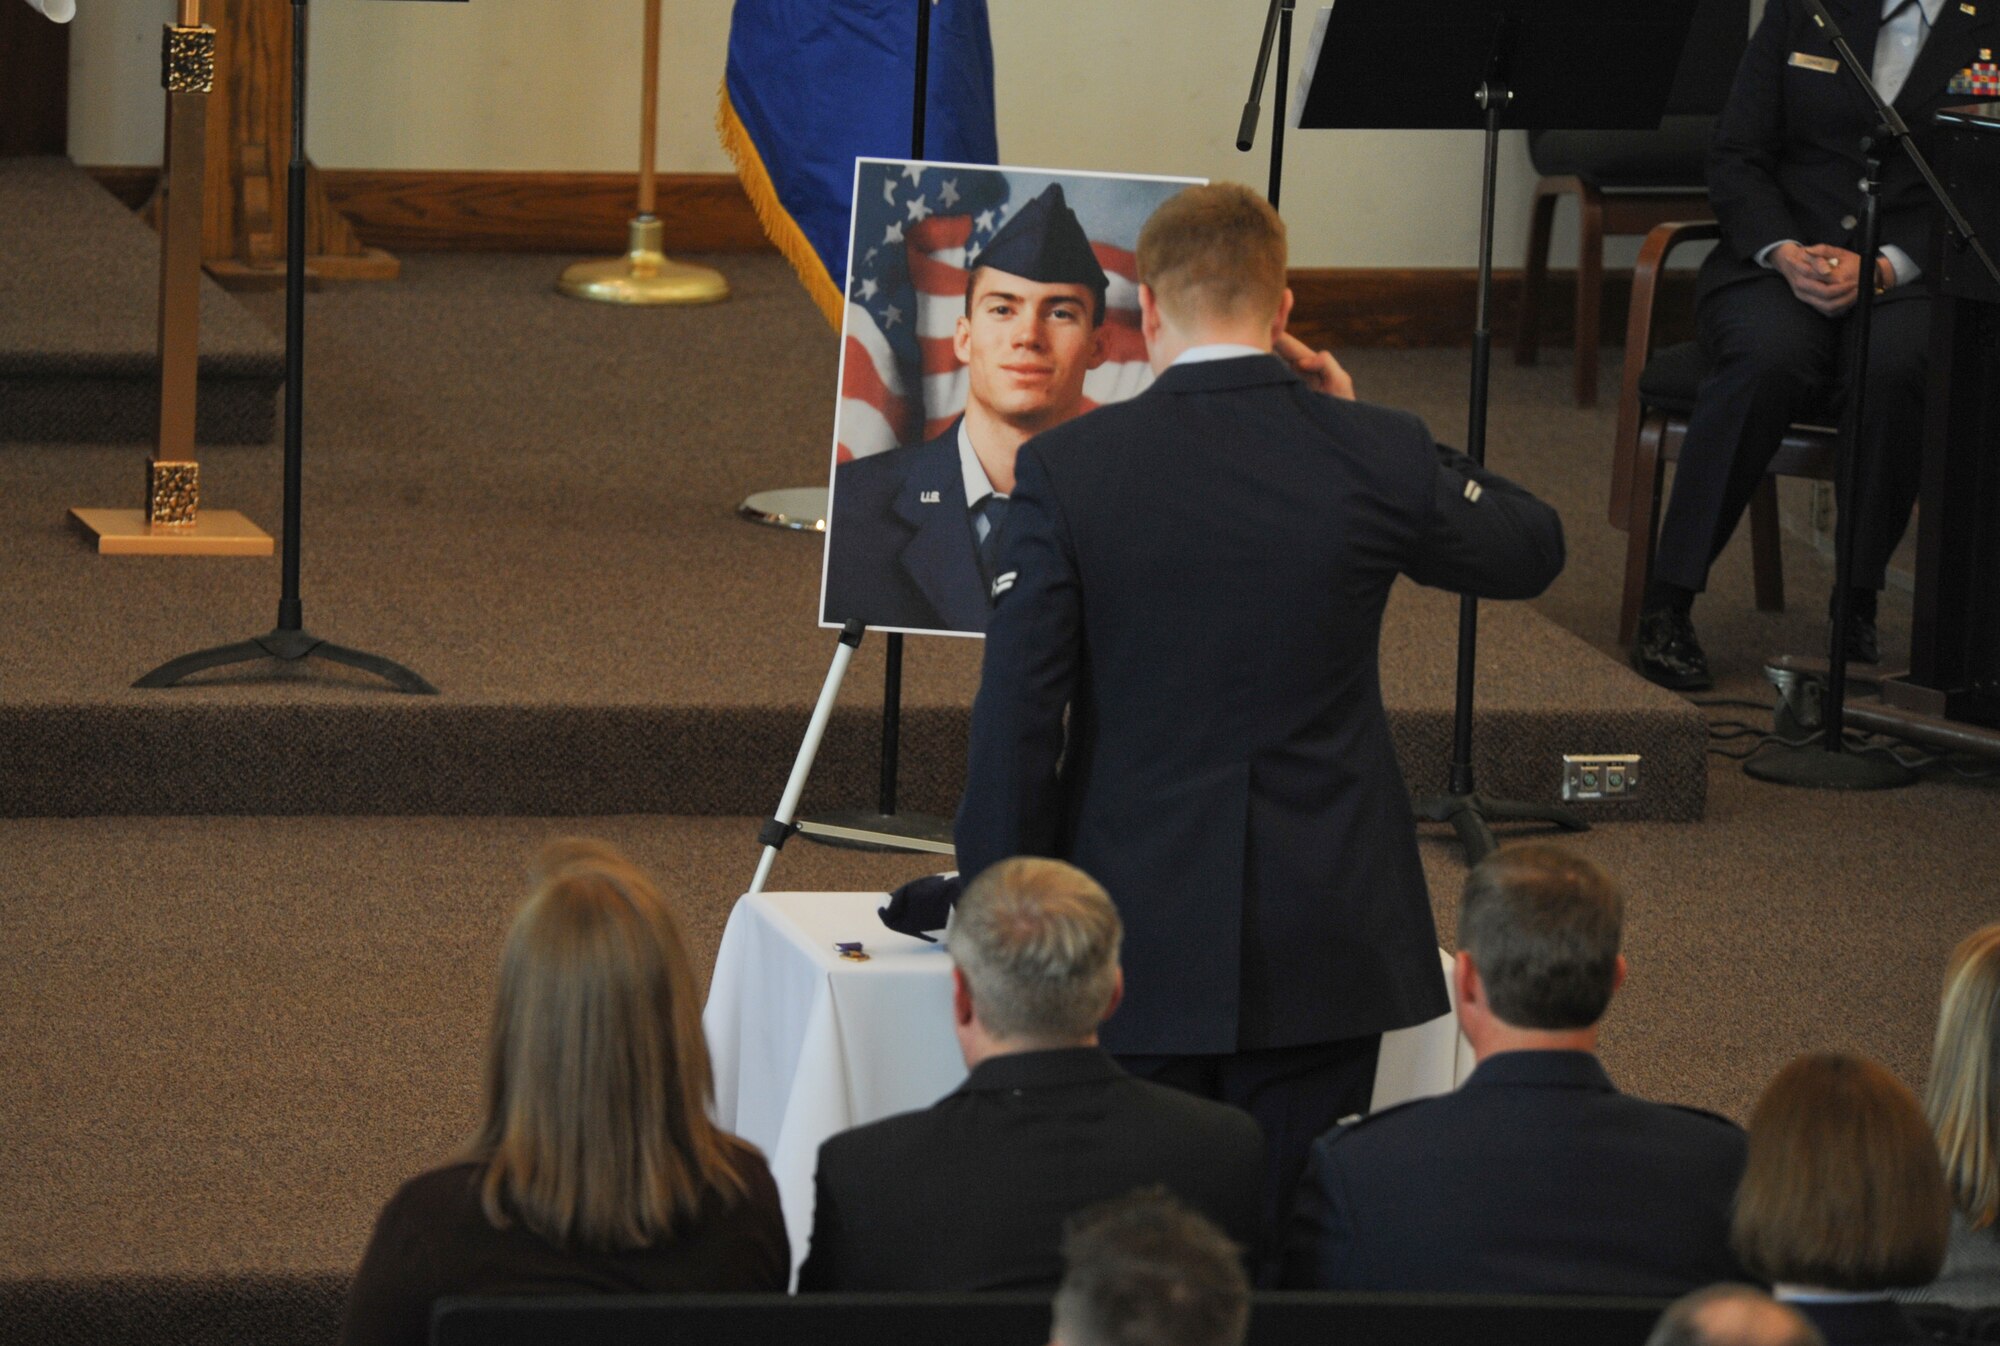 ELMENDORF AIR FORCE BASE, Alaska -- An Airman from the 3rd Logistics Readiness Squadron, renders a final salute to Staff Sgt. Timothy Bowles, 3rd LRS, at a memorial service here March 19. Bowles was killed in action in Afghanistan March 15, 2009. (U.S. Air Force photo/Senior Airman Matthew Owens)